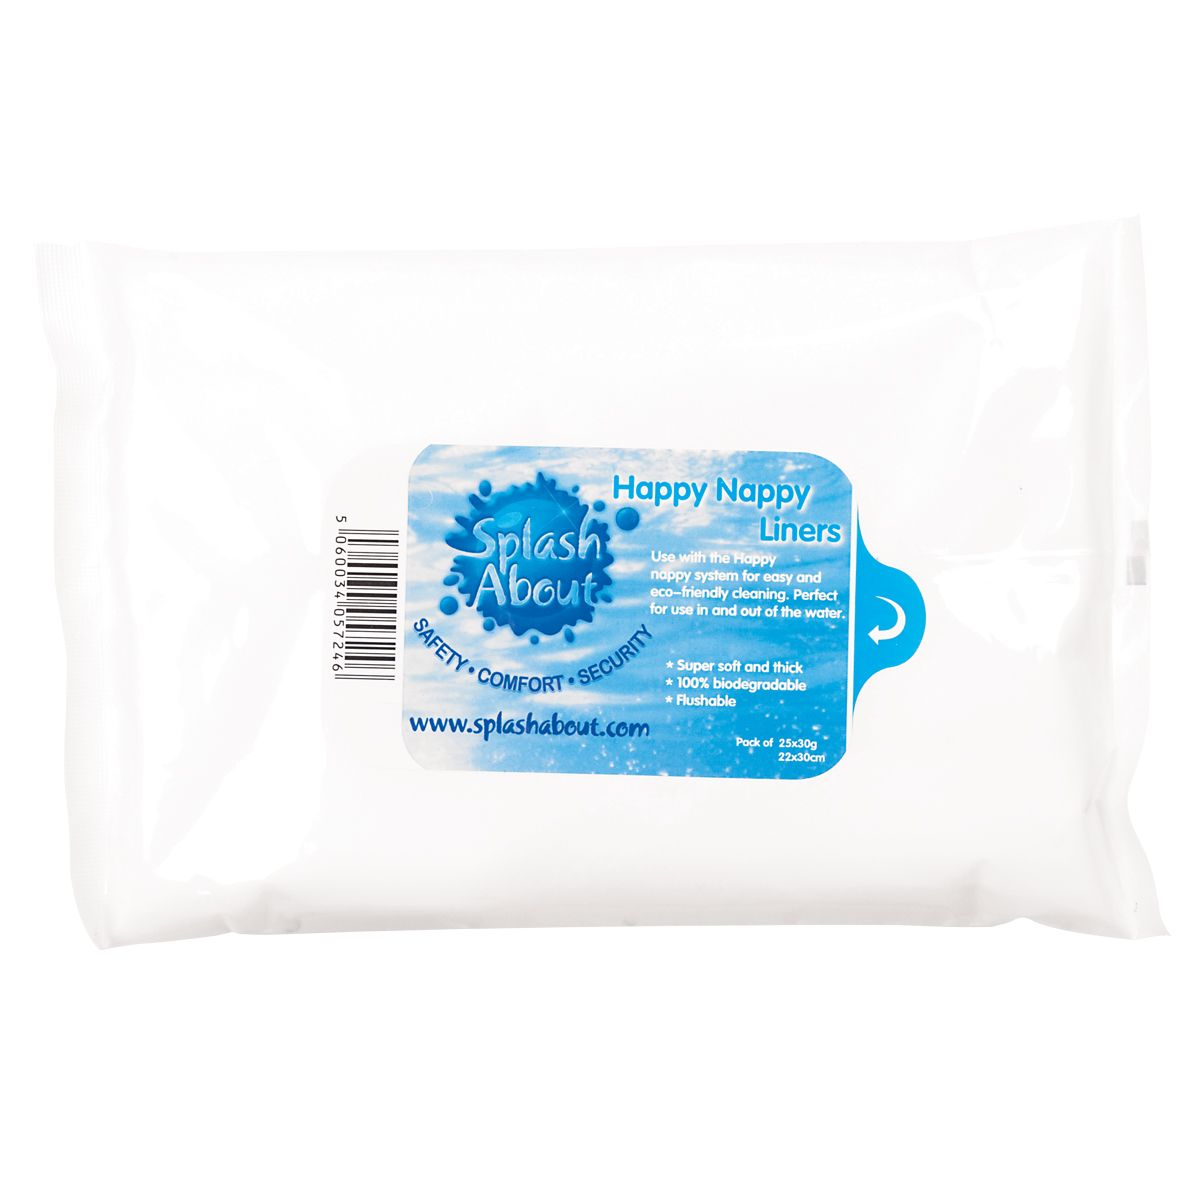 Splash About Swim Nappy Liners Happy Nappy Pack of 25 Flushable Biodegradable 